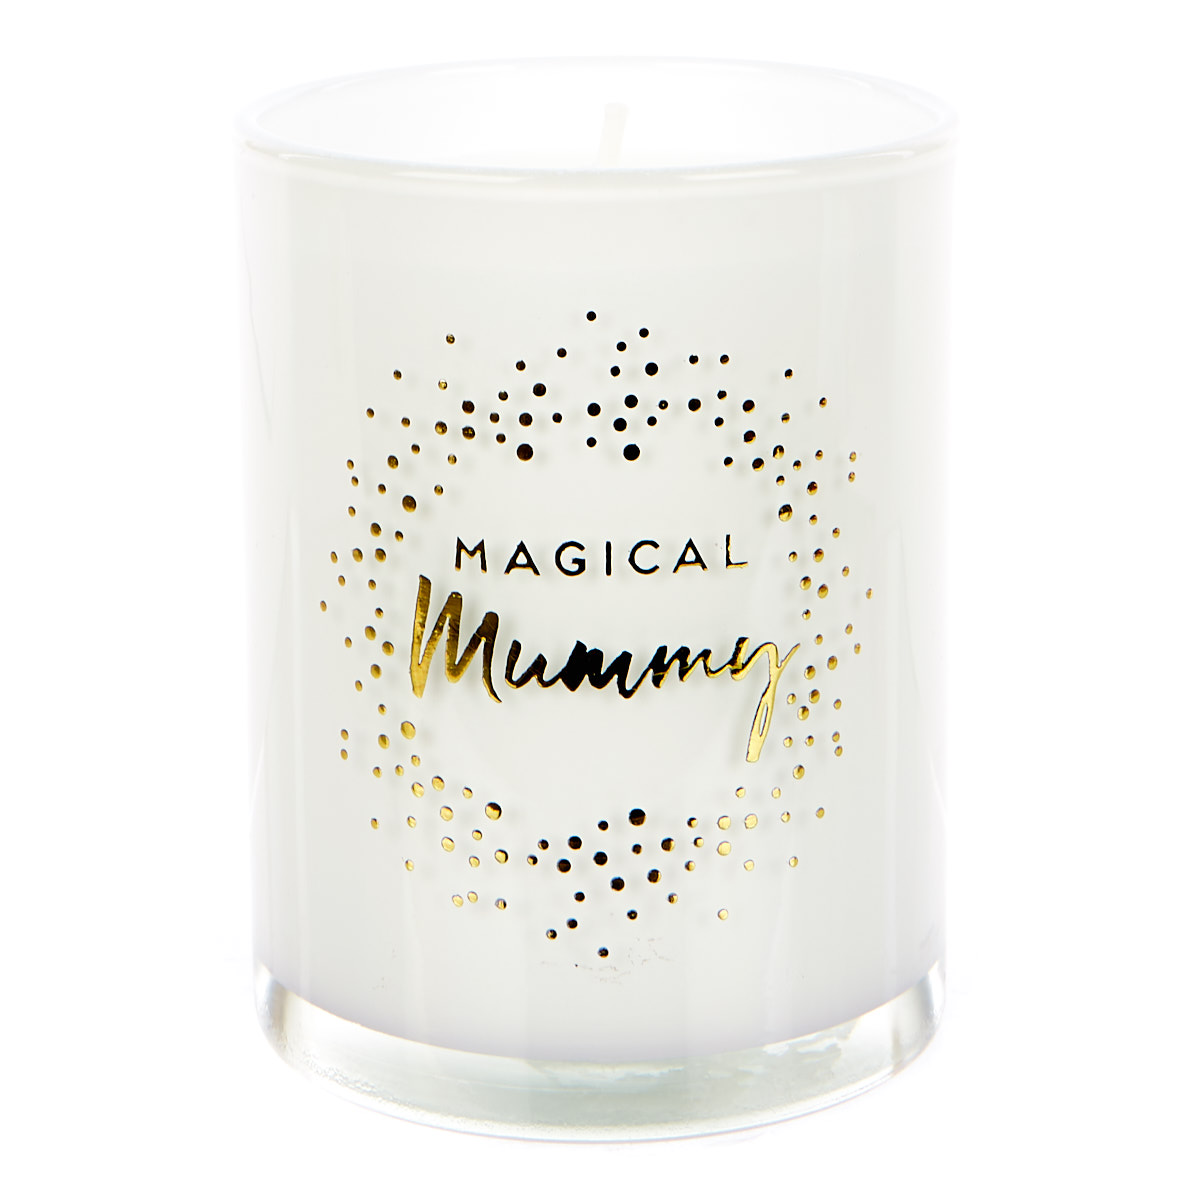 Vanilla Scented Candle - Magical Mummy